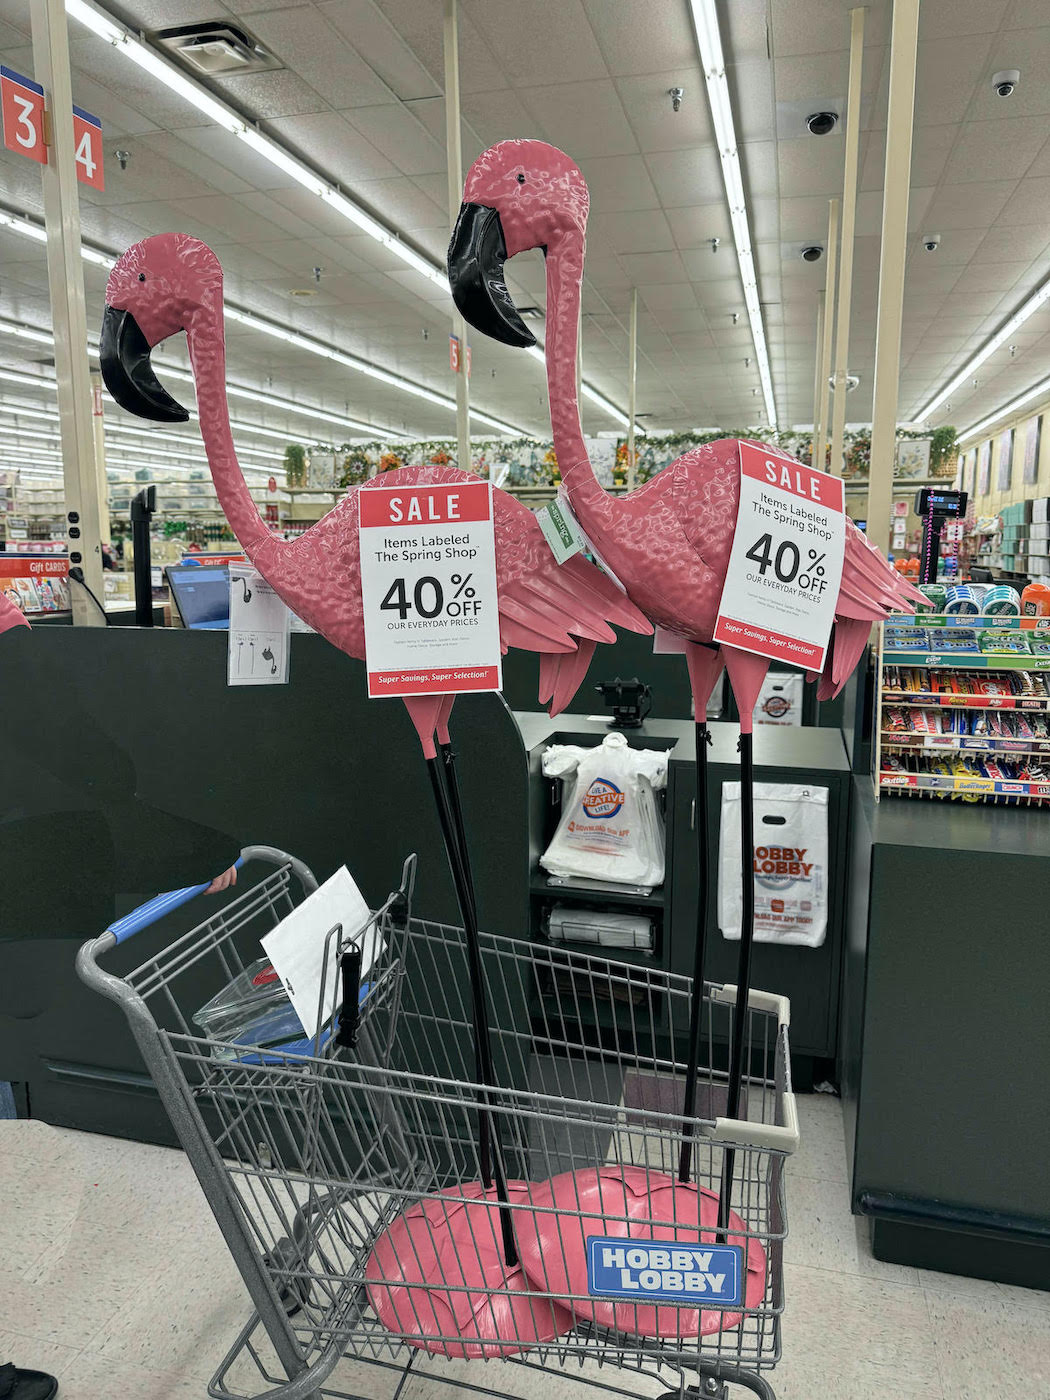 A pair of pink flamingos on sale are perfect for your front yard!